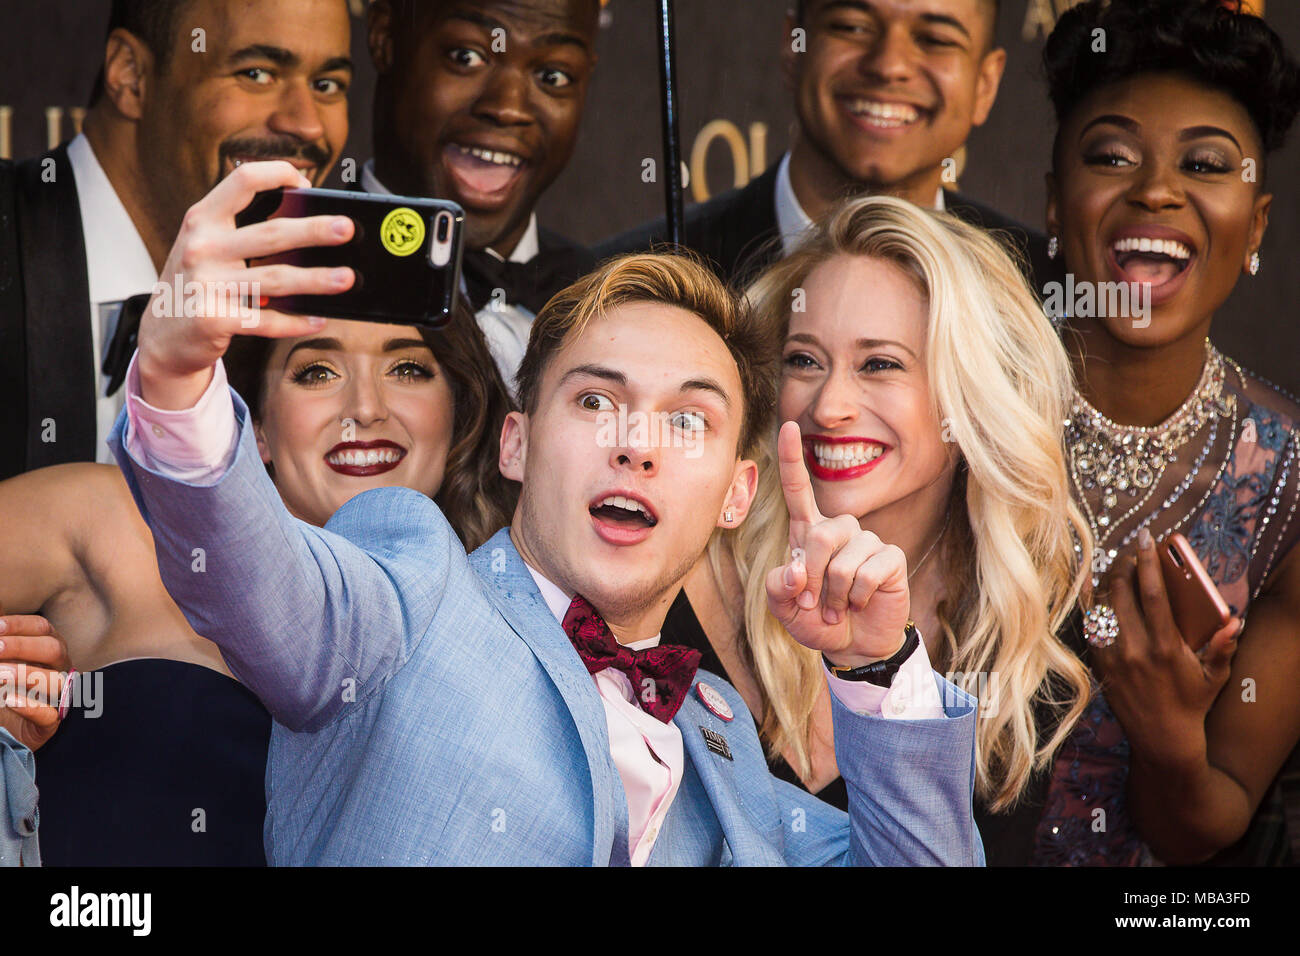 London, UK. 8th April, 2018. The cast of smash hit musical Hamilton pose for selfies in the rain on the red carpet at the 2018 Olivier Awards held at the Royal Albert Hall. Hamilton went on the win a record seven Oliviers including Best New Musical. Credit: David Betteridge/Alamy Live News Stock Photo